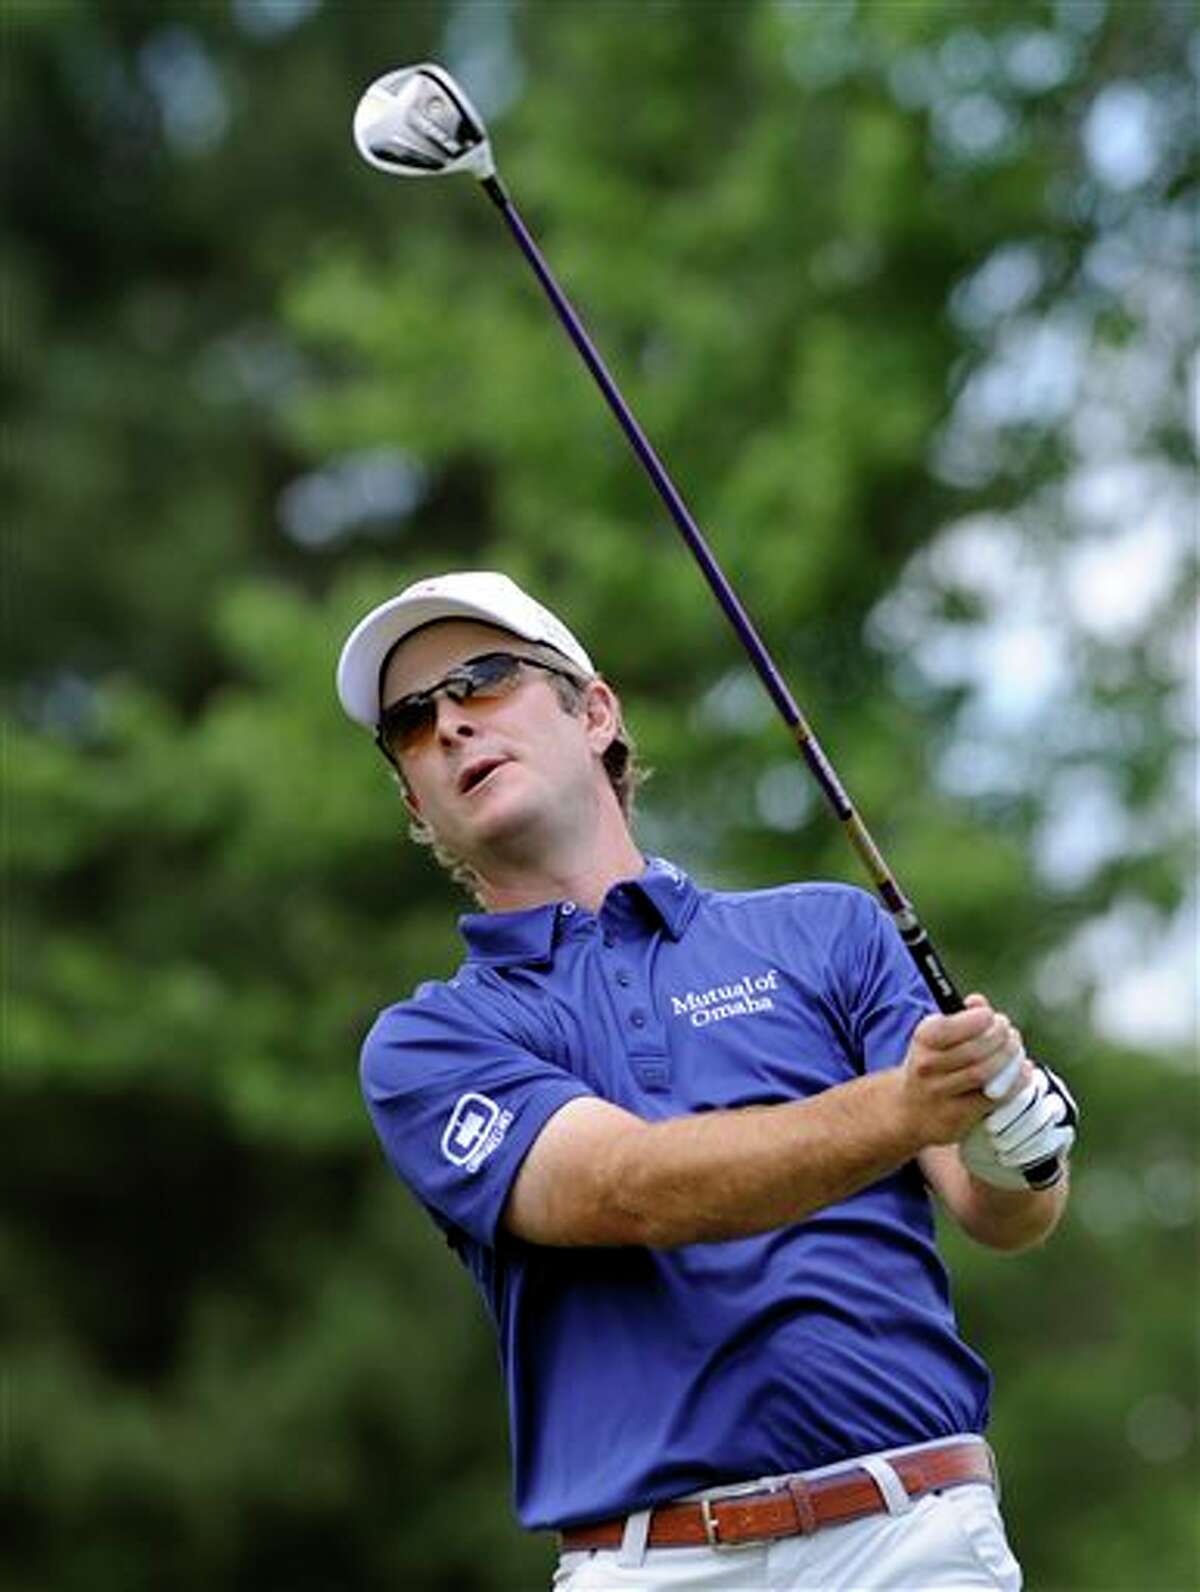 Kevin Streelman watches his drive on the second hole during the final round of theTravelers Championship golf tournament in Cromwell, Conn., Sunday, June 22, 2014. Streelman finished his round with seven straight birdies to win the tournament at 15-under par. (AP Photo/Fred Beckham)